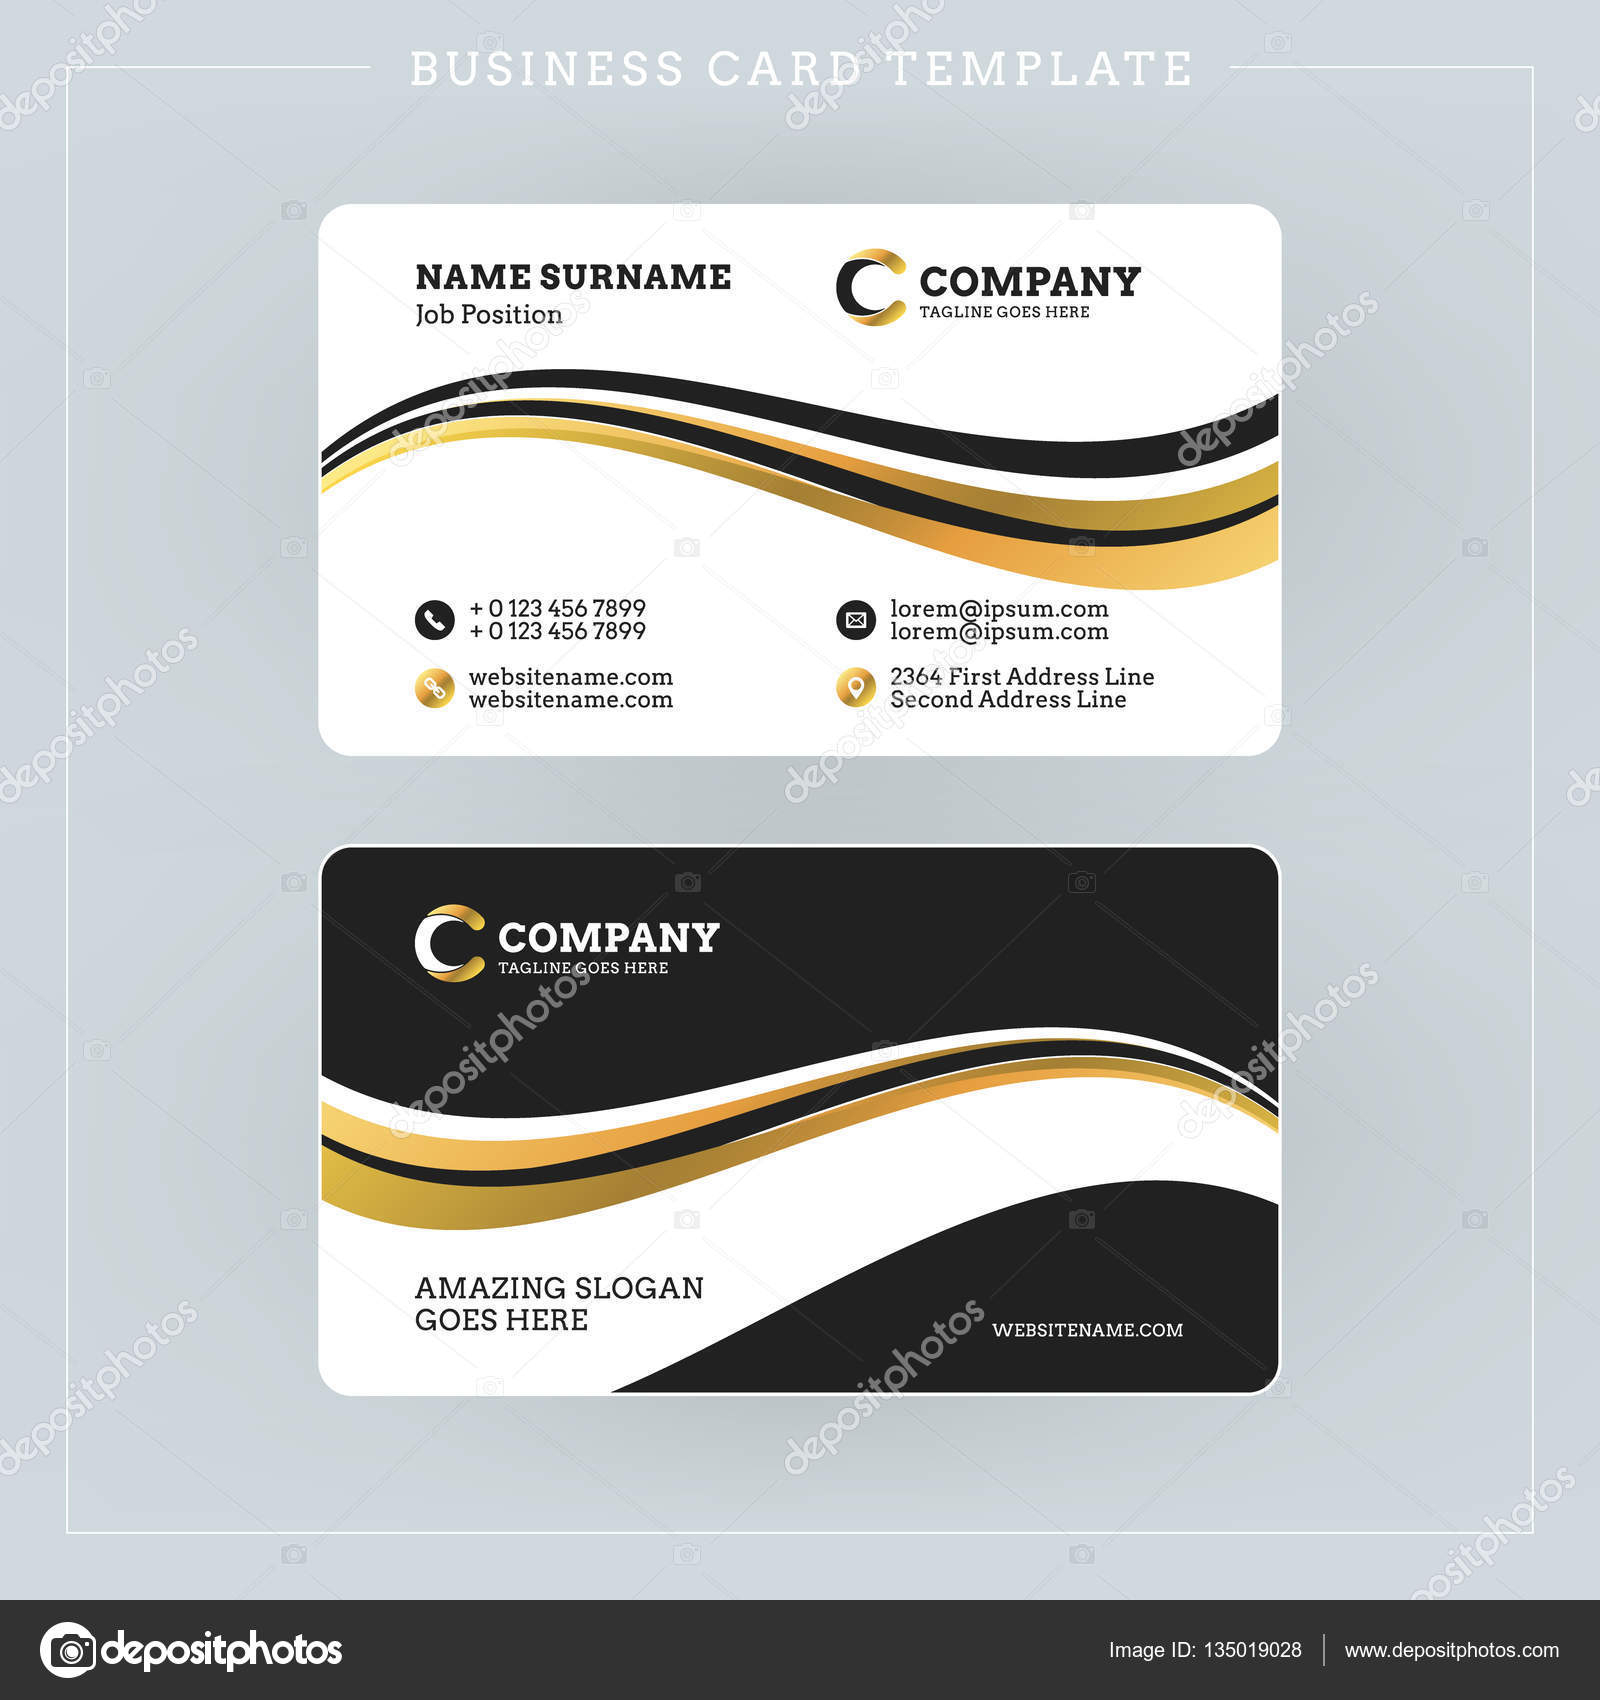 012 Depositphotos 135019028 Stock Illustration Double Sided Throughout Double Sided Business Card Template Illustrator